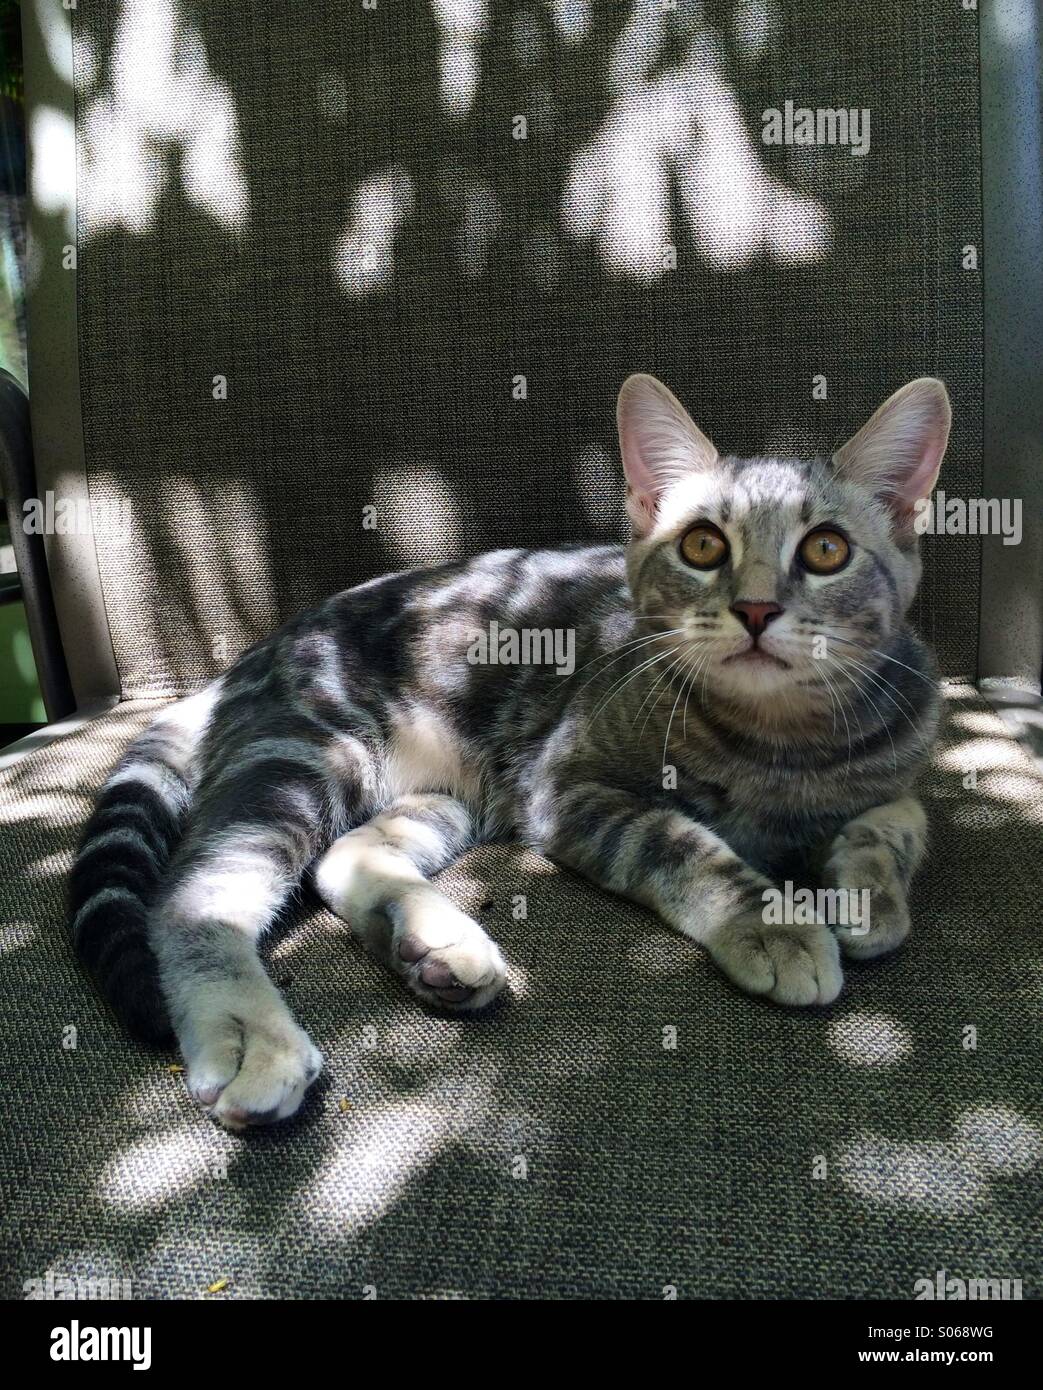 Silver grey tabby cat is camouflaged against the fabric of a grey lawn chair in dappled outside light. Stock Photo